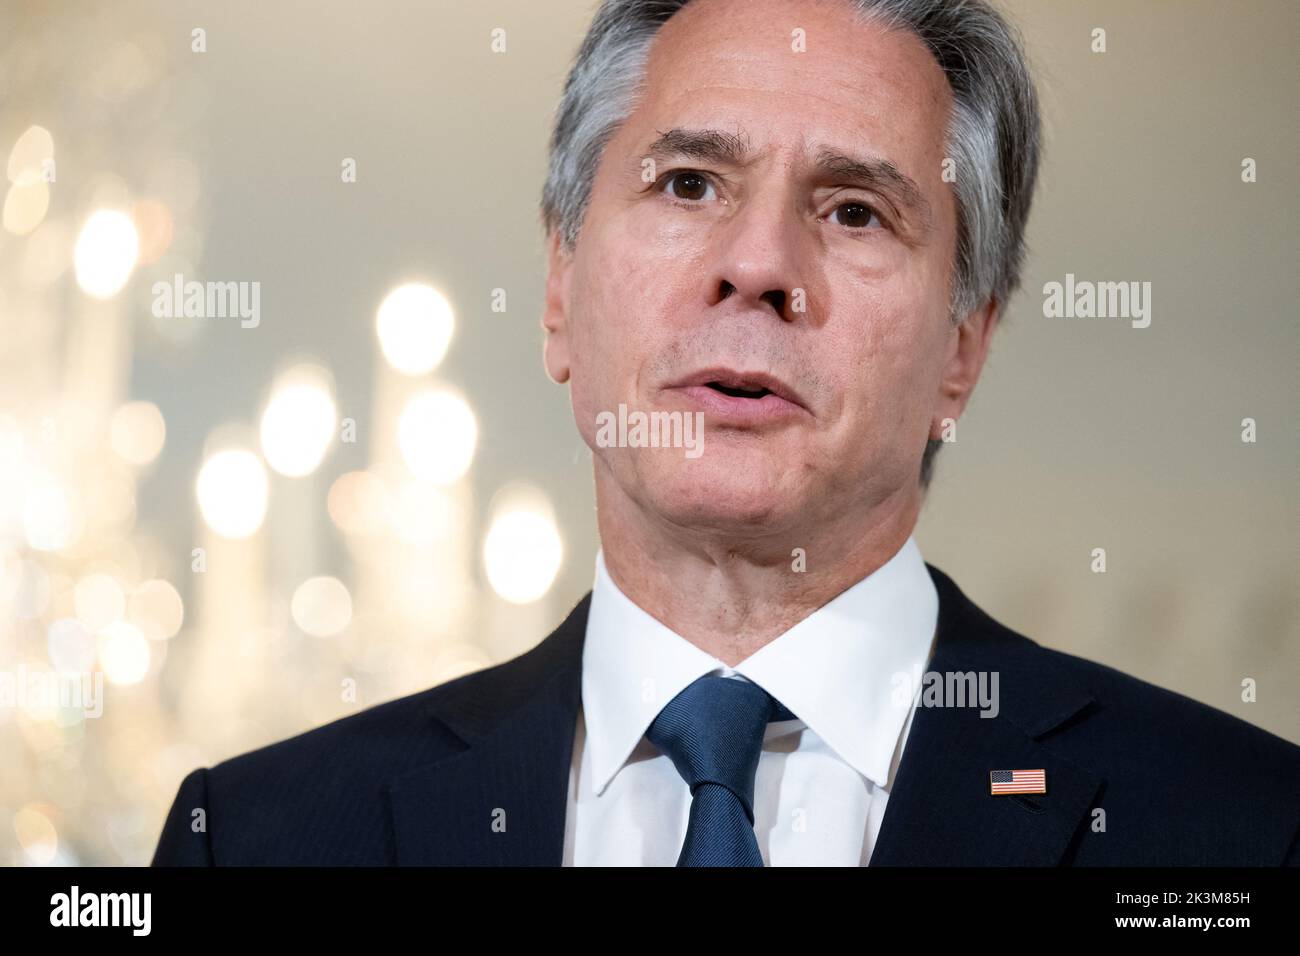 US Secretary of State Antony Blinken speaks to the press prior to meetings with Tajikistan Foreign Minister Sirojiddin Muhriddin at the State Department in Washington, DC, U.S. September 27, 2022. Saul Loeb/Pool via REUTERS Stock Photo